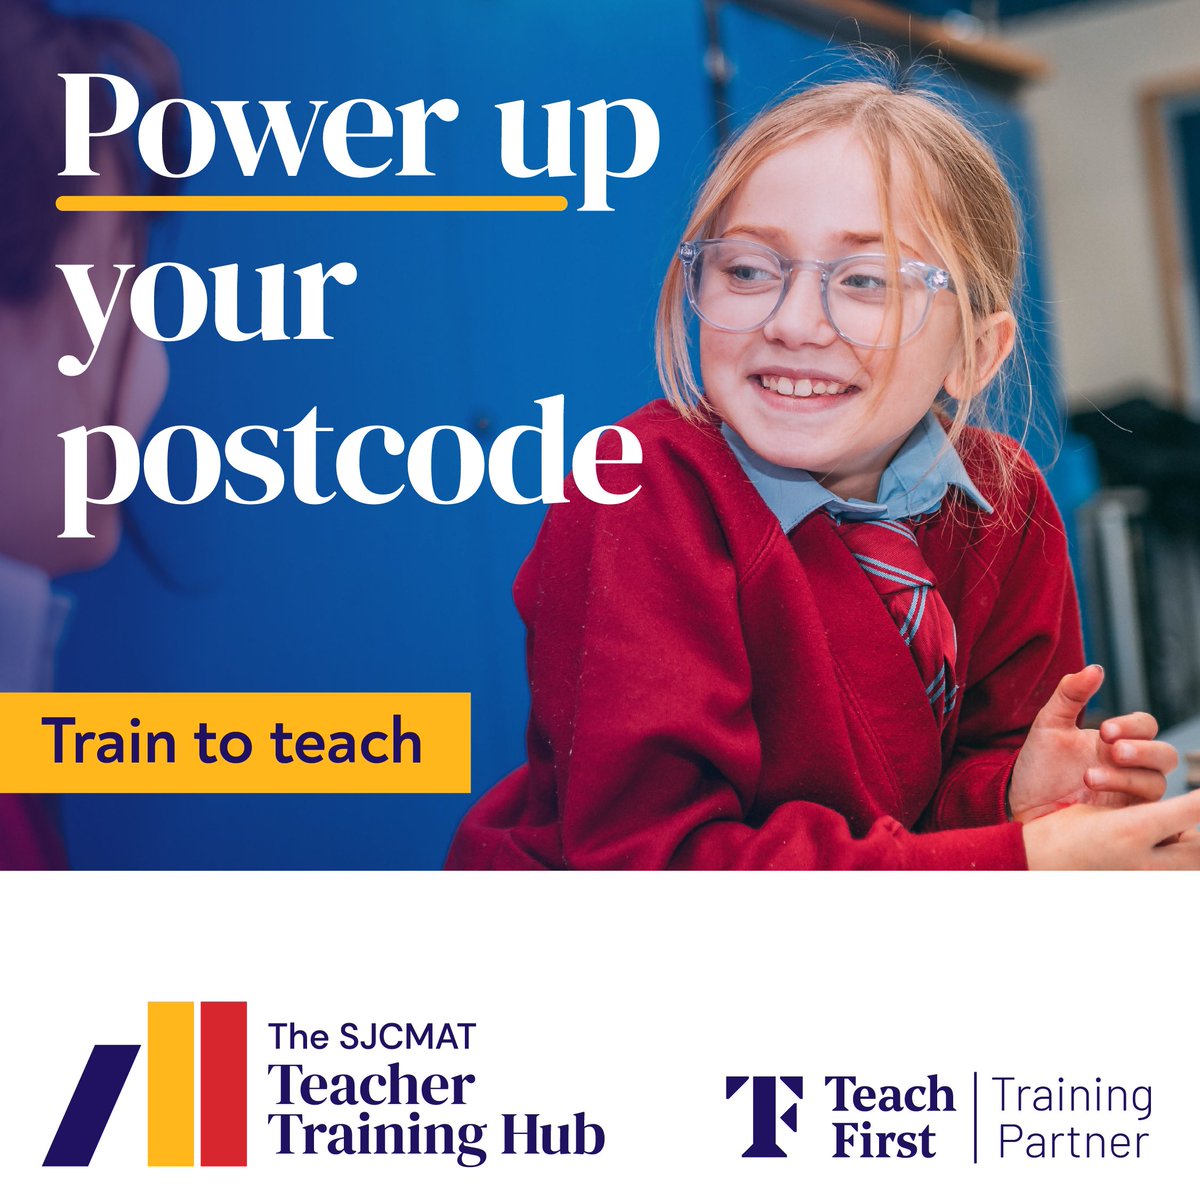 Make a difference in your community. Train to teach. Discover how our research-led training programme gives you everything you need to kickstart your career in teaching and qualify in just one year: bit.ly/3wsZZxy